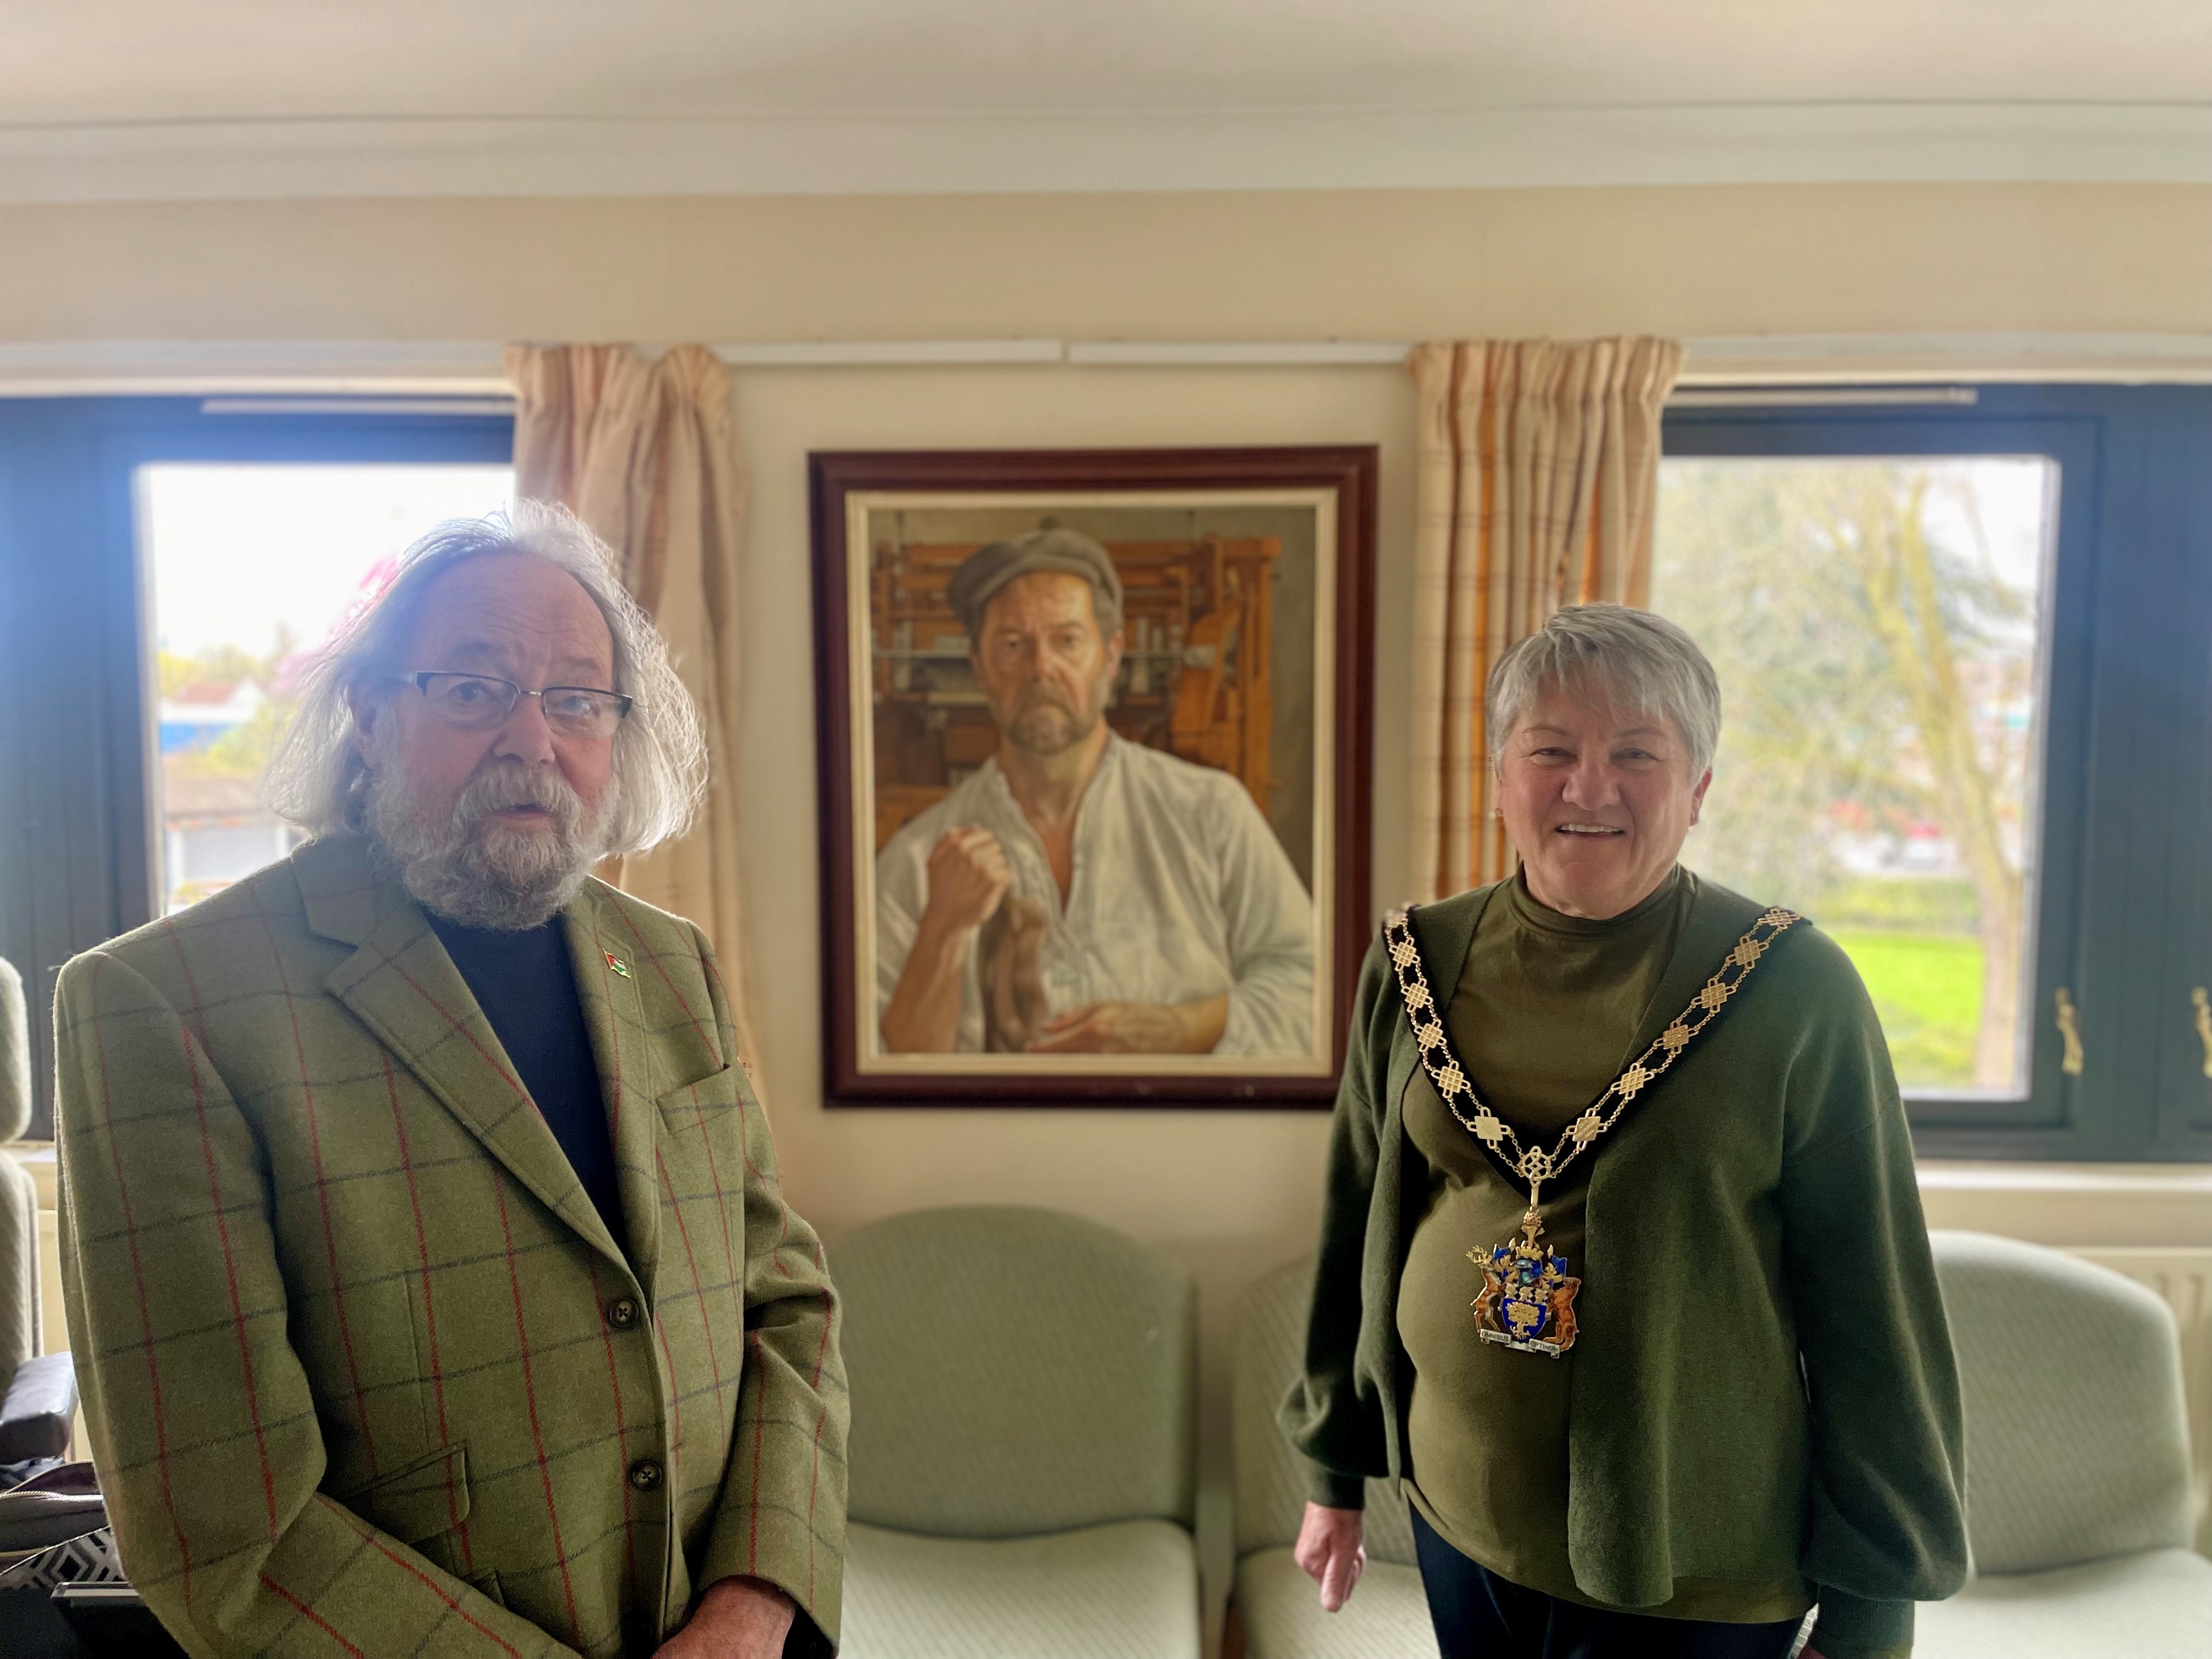 Artist Grahame Wheatley, the Mayor of Gedling and the award winning portrait